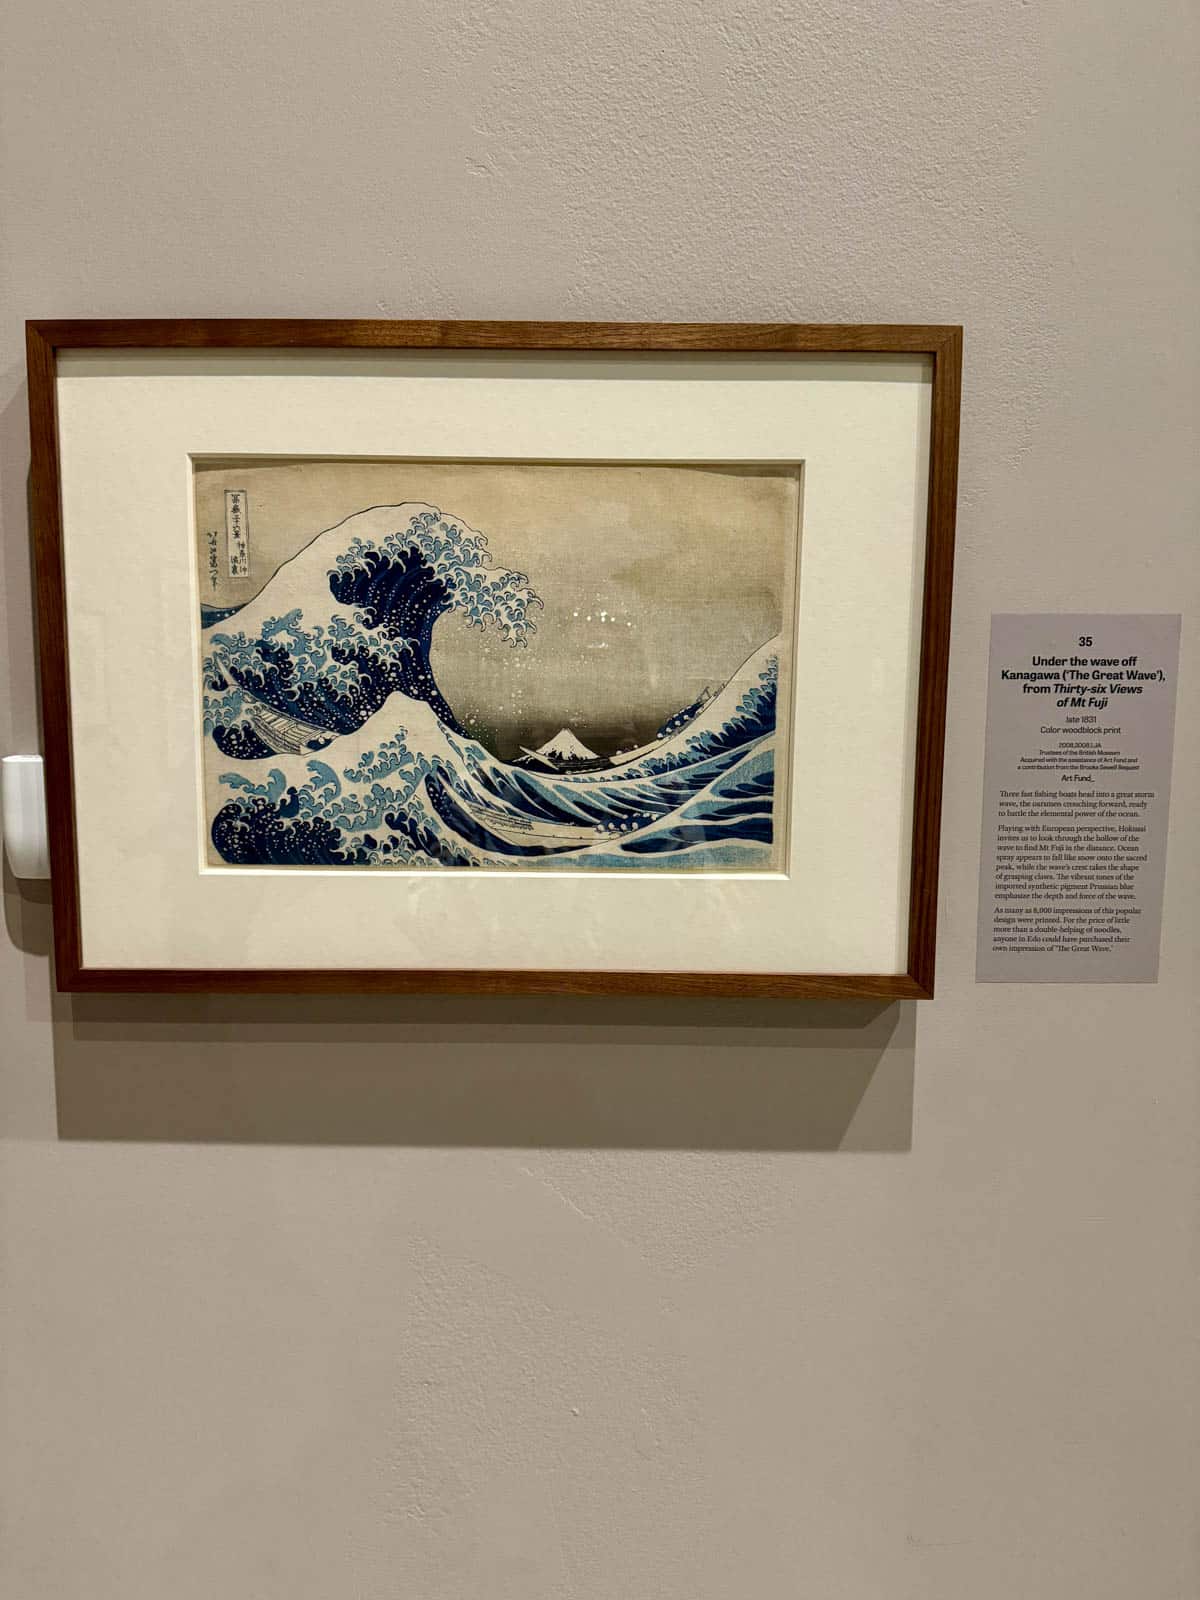 Photograph of art with a wave at museum.